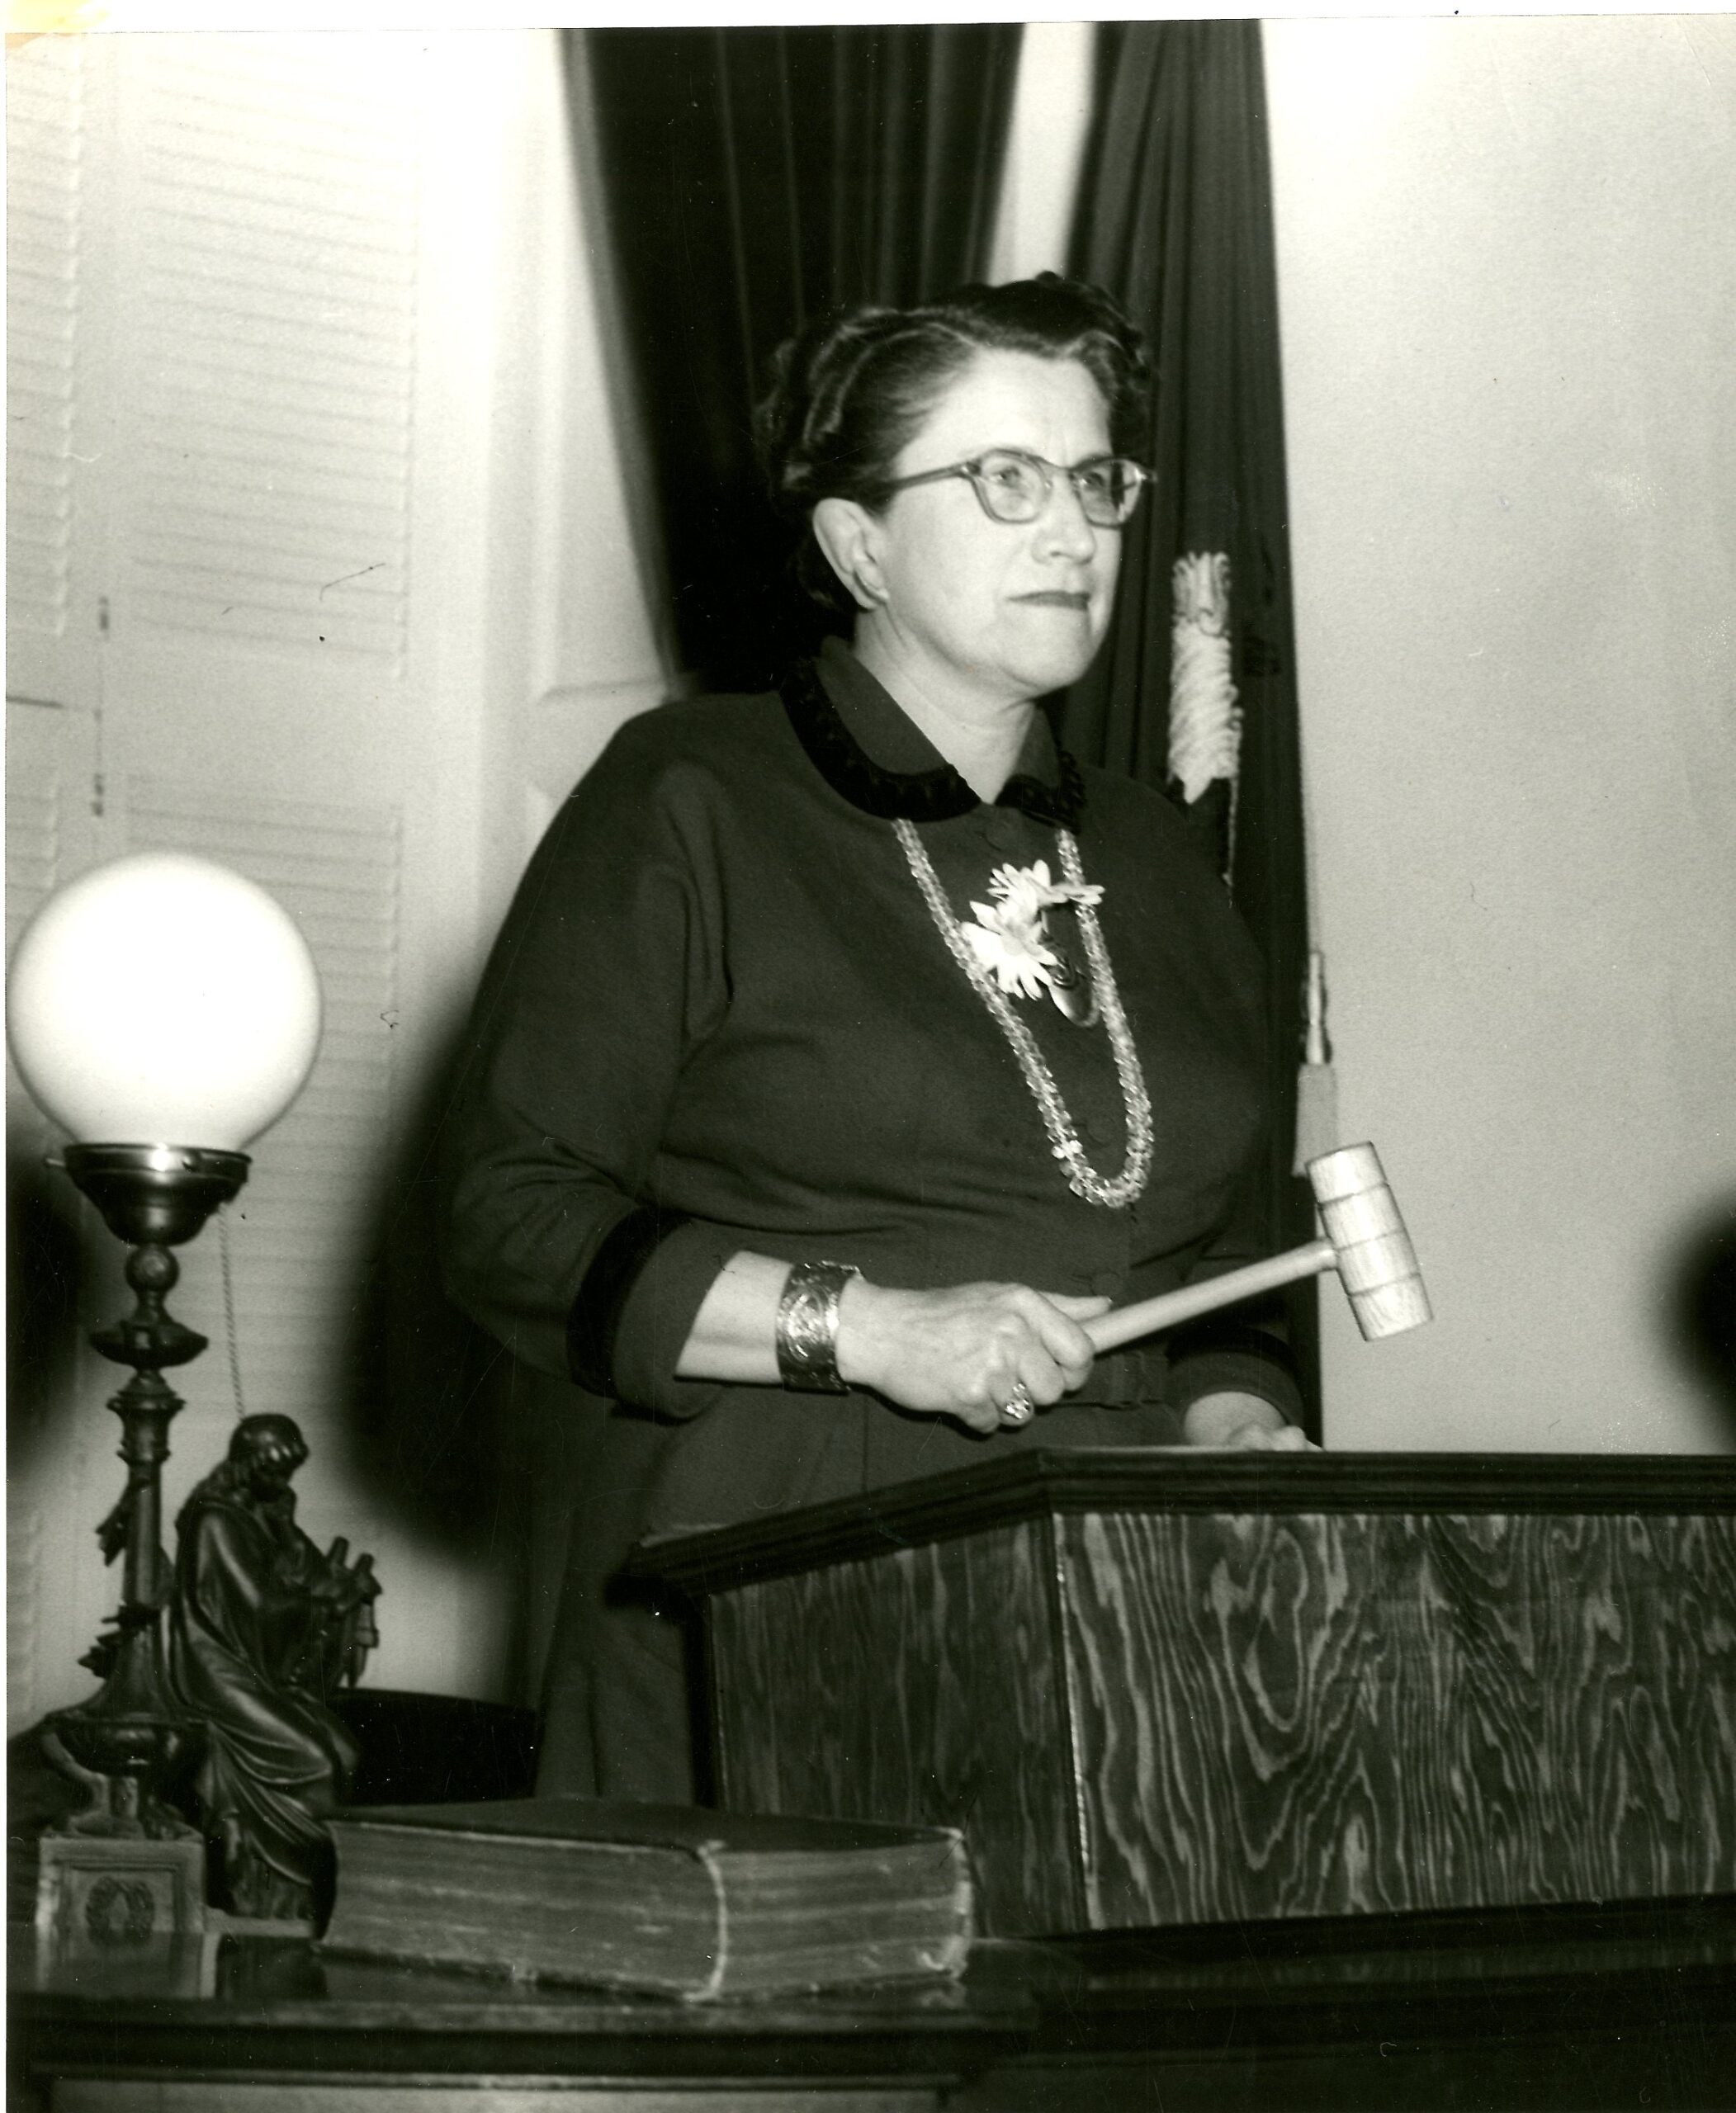 Consuelo standing at a podium holding a wooden gavel.